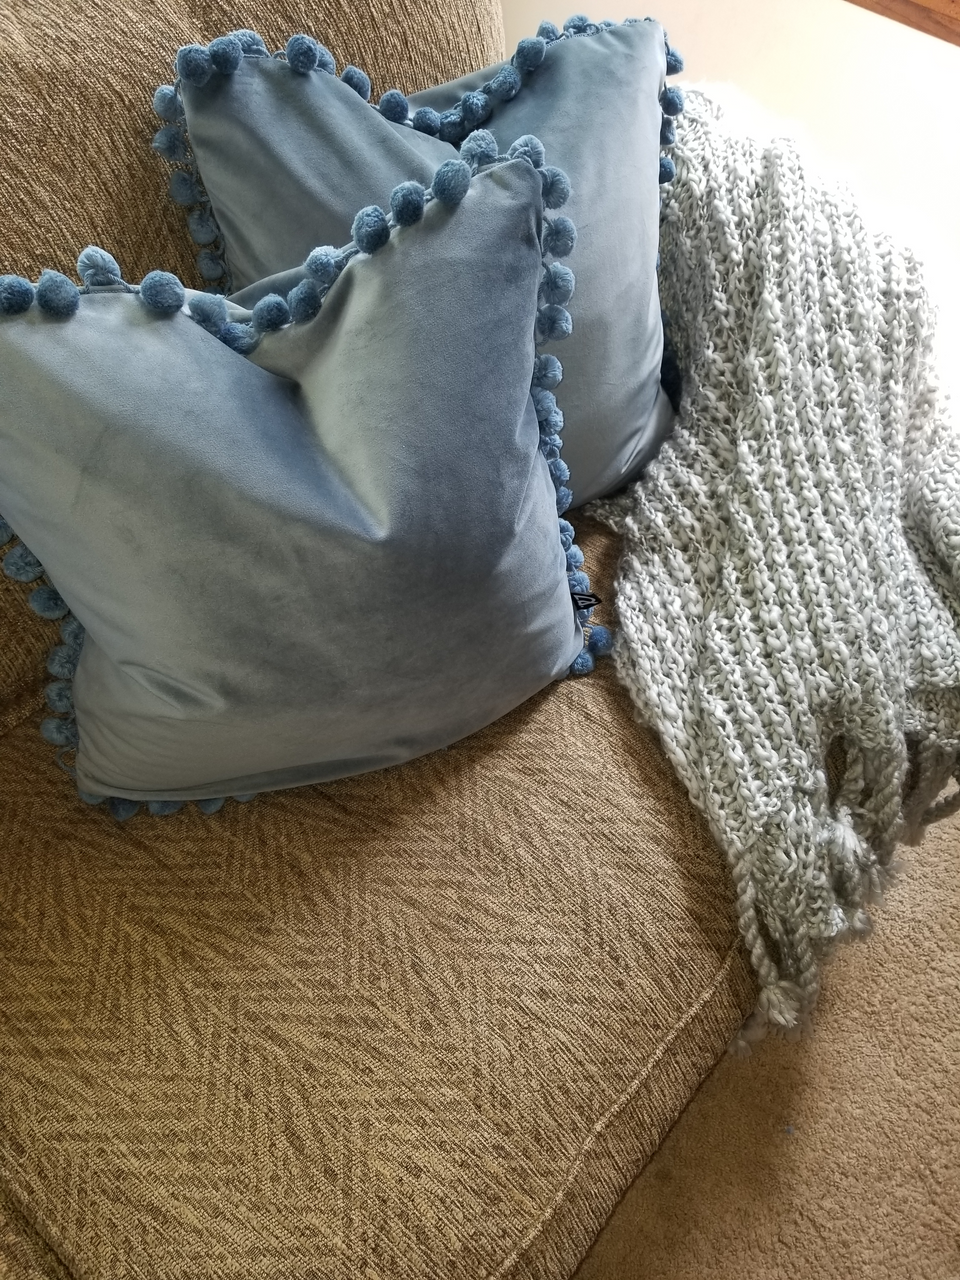 blue velour pillow covers with matching pom pom trim on khaki couch with gray throw cover